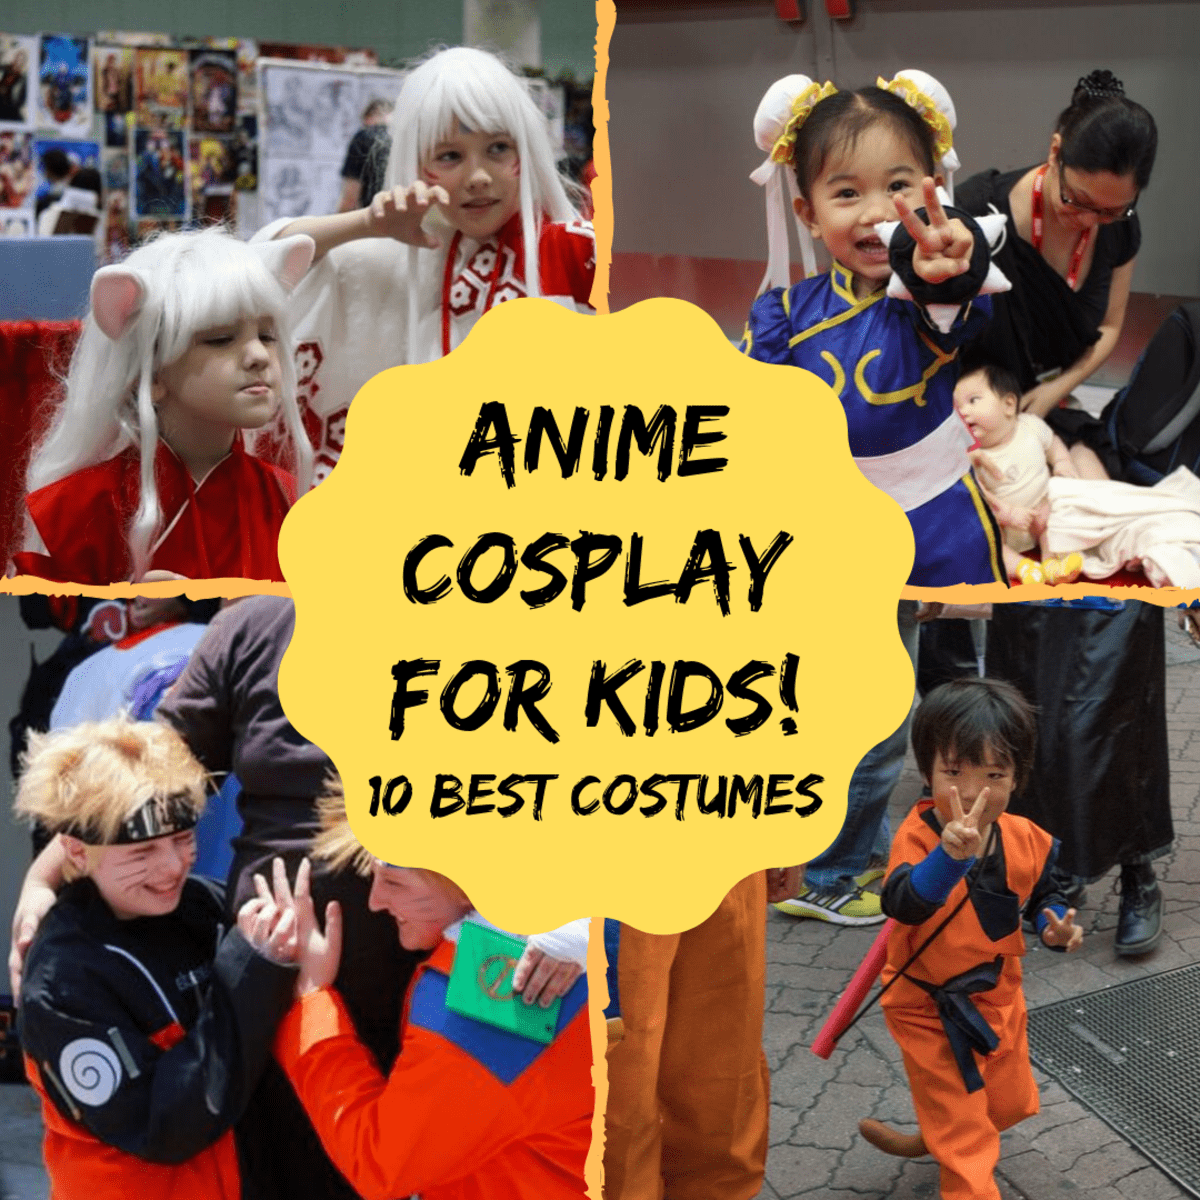 Top 10 Best Anime Cosplay Costumes for Kids - Holidappy